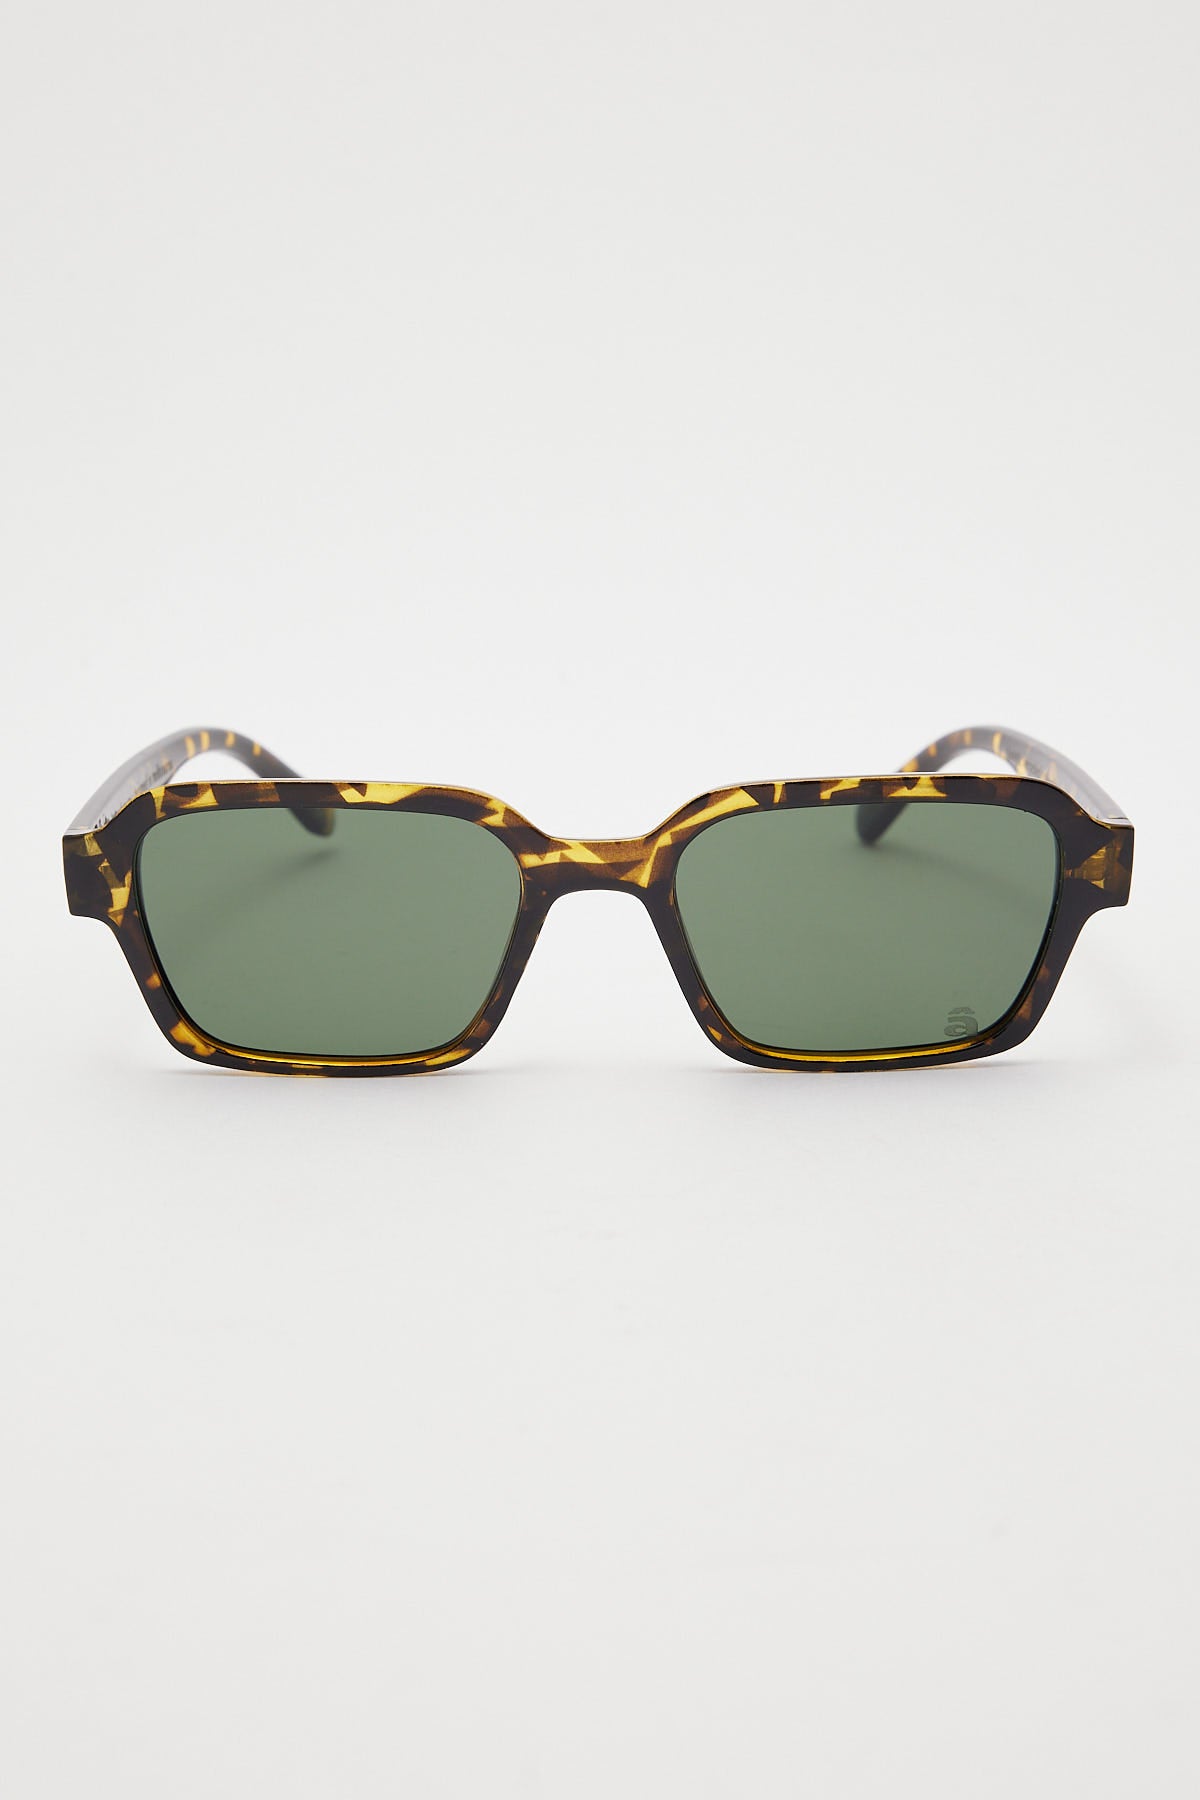 Szade Booth Wasp/Moss Polarized